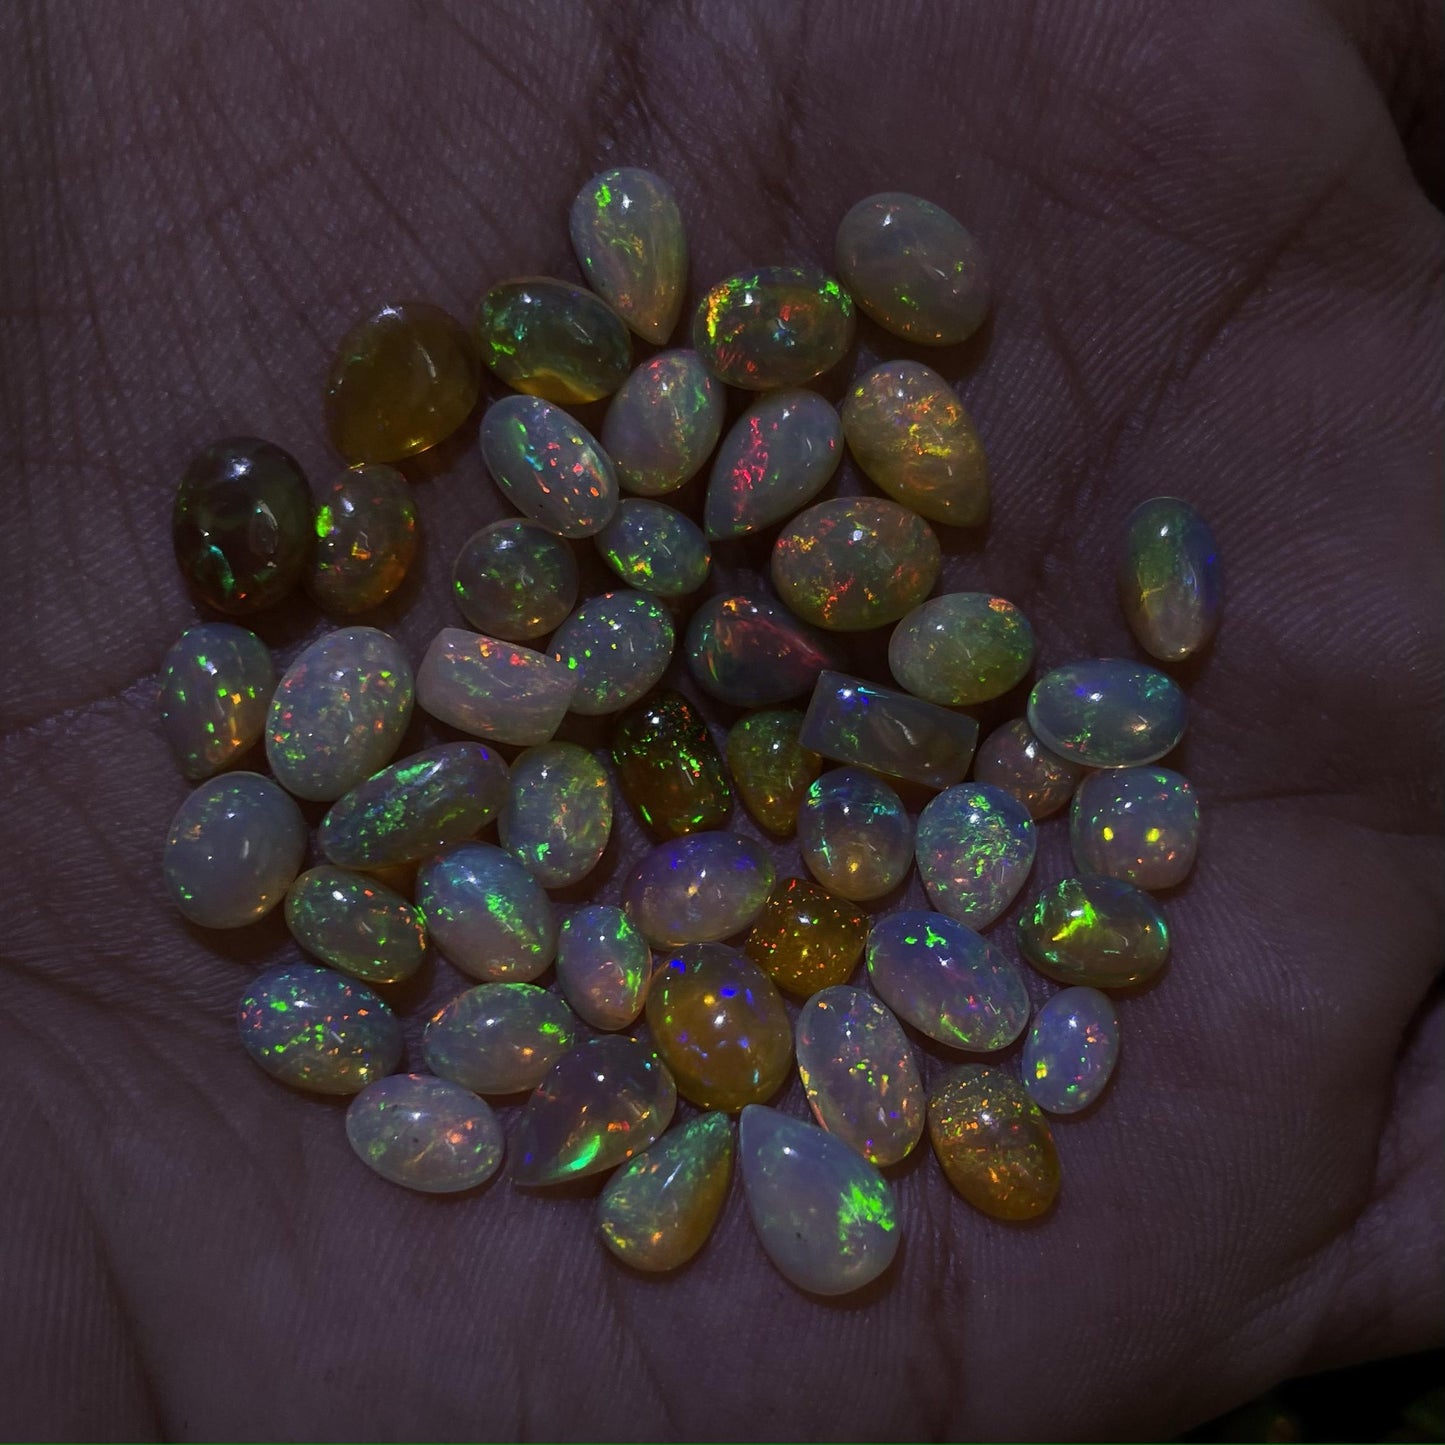 Exquisite Natural Ethiopian Opal Cabochon: Stunning 0.4 cts of Natural Beauty